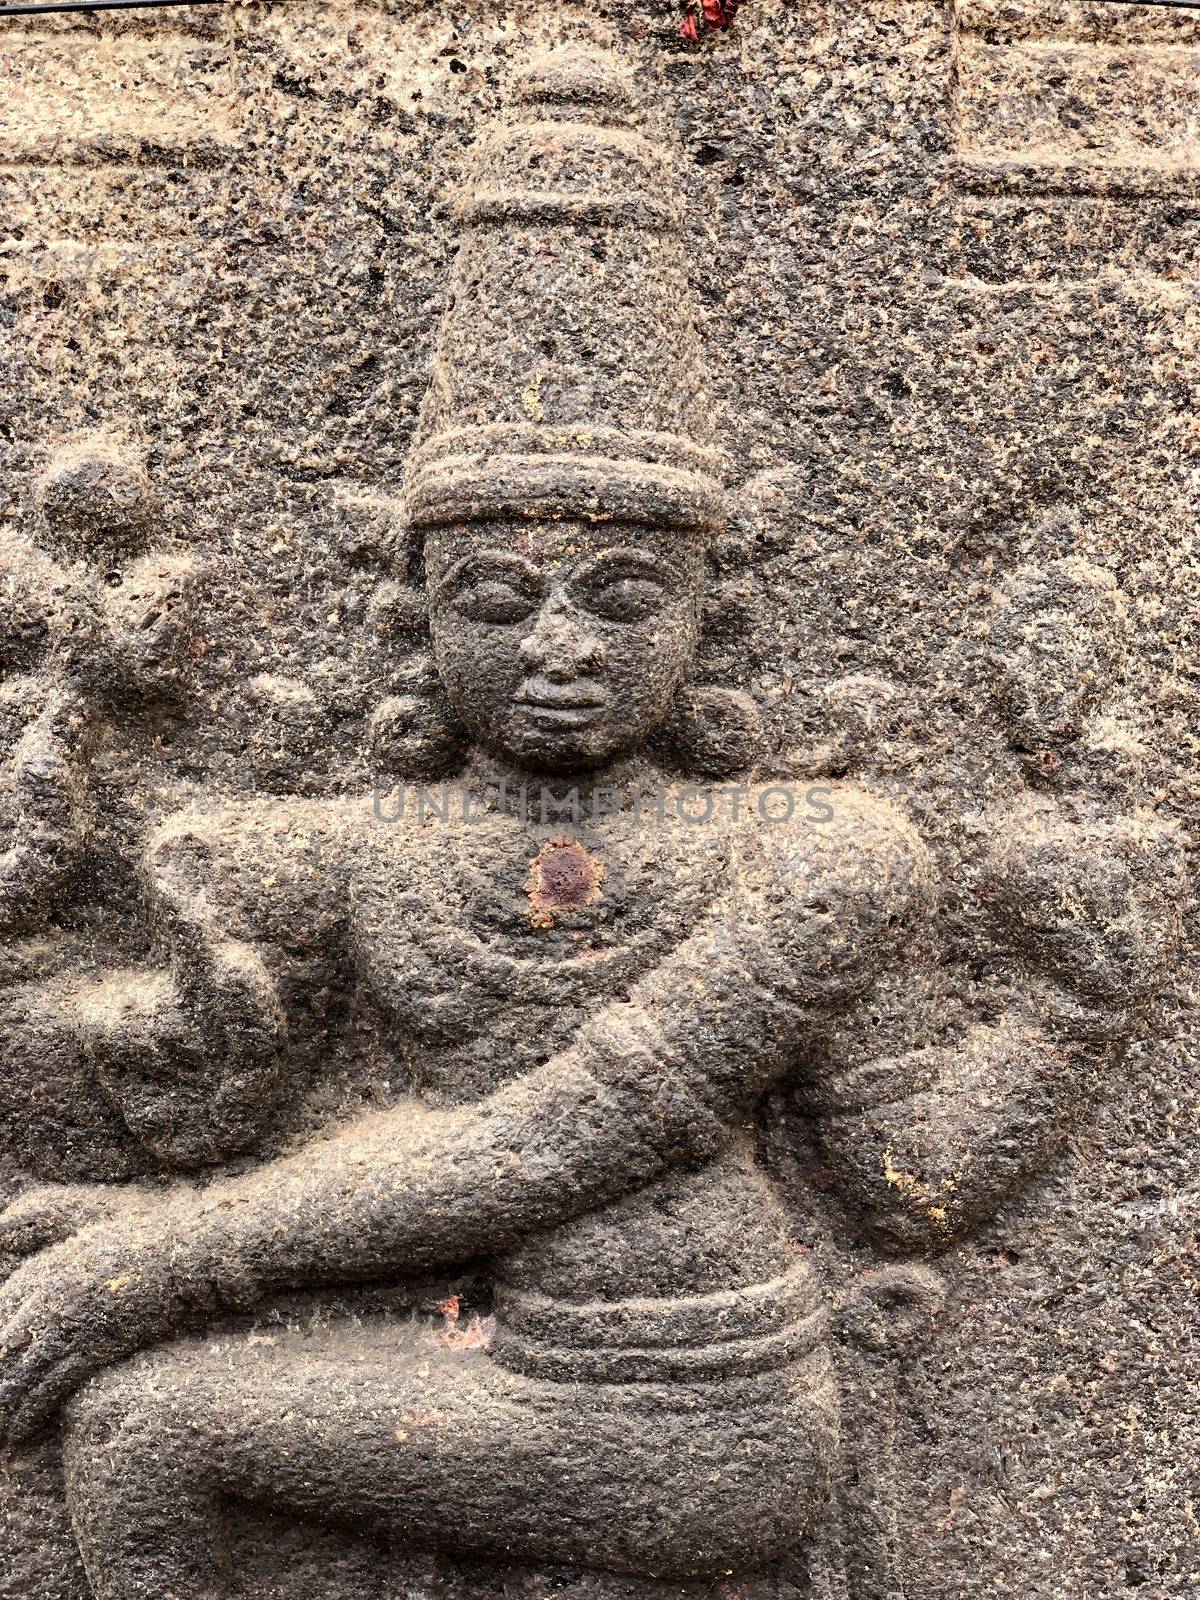 Bas relief sculpture of Hindu God carved in the walls of the Shiva temple walls at Tamil nadu by prabhakaran851